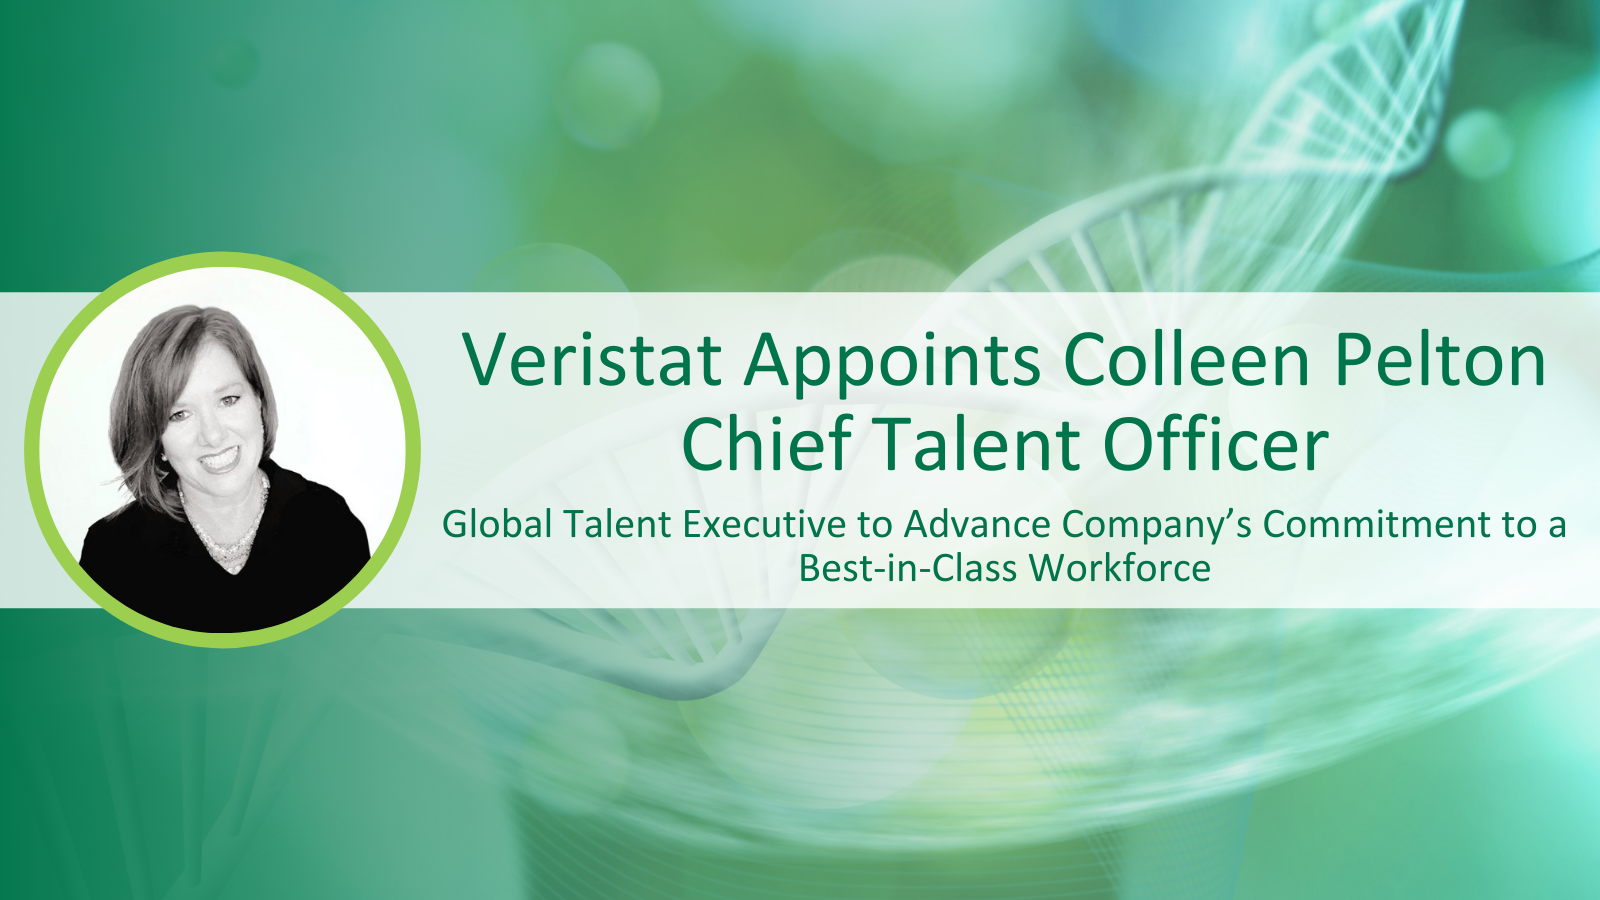 Veristat Appoints Colleen Pelton Chief Talent Officer